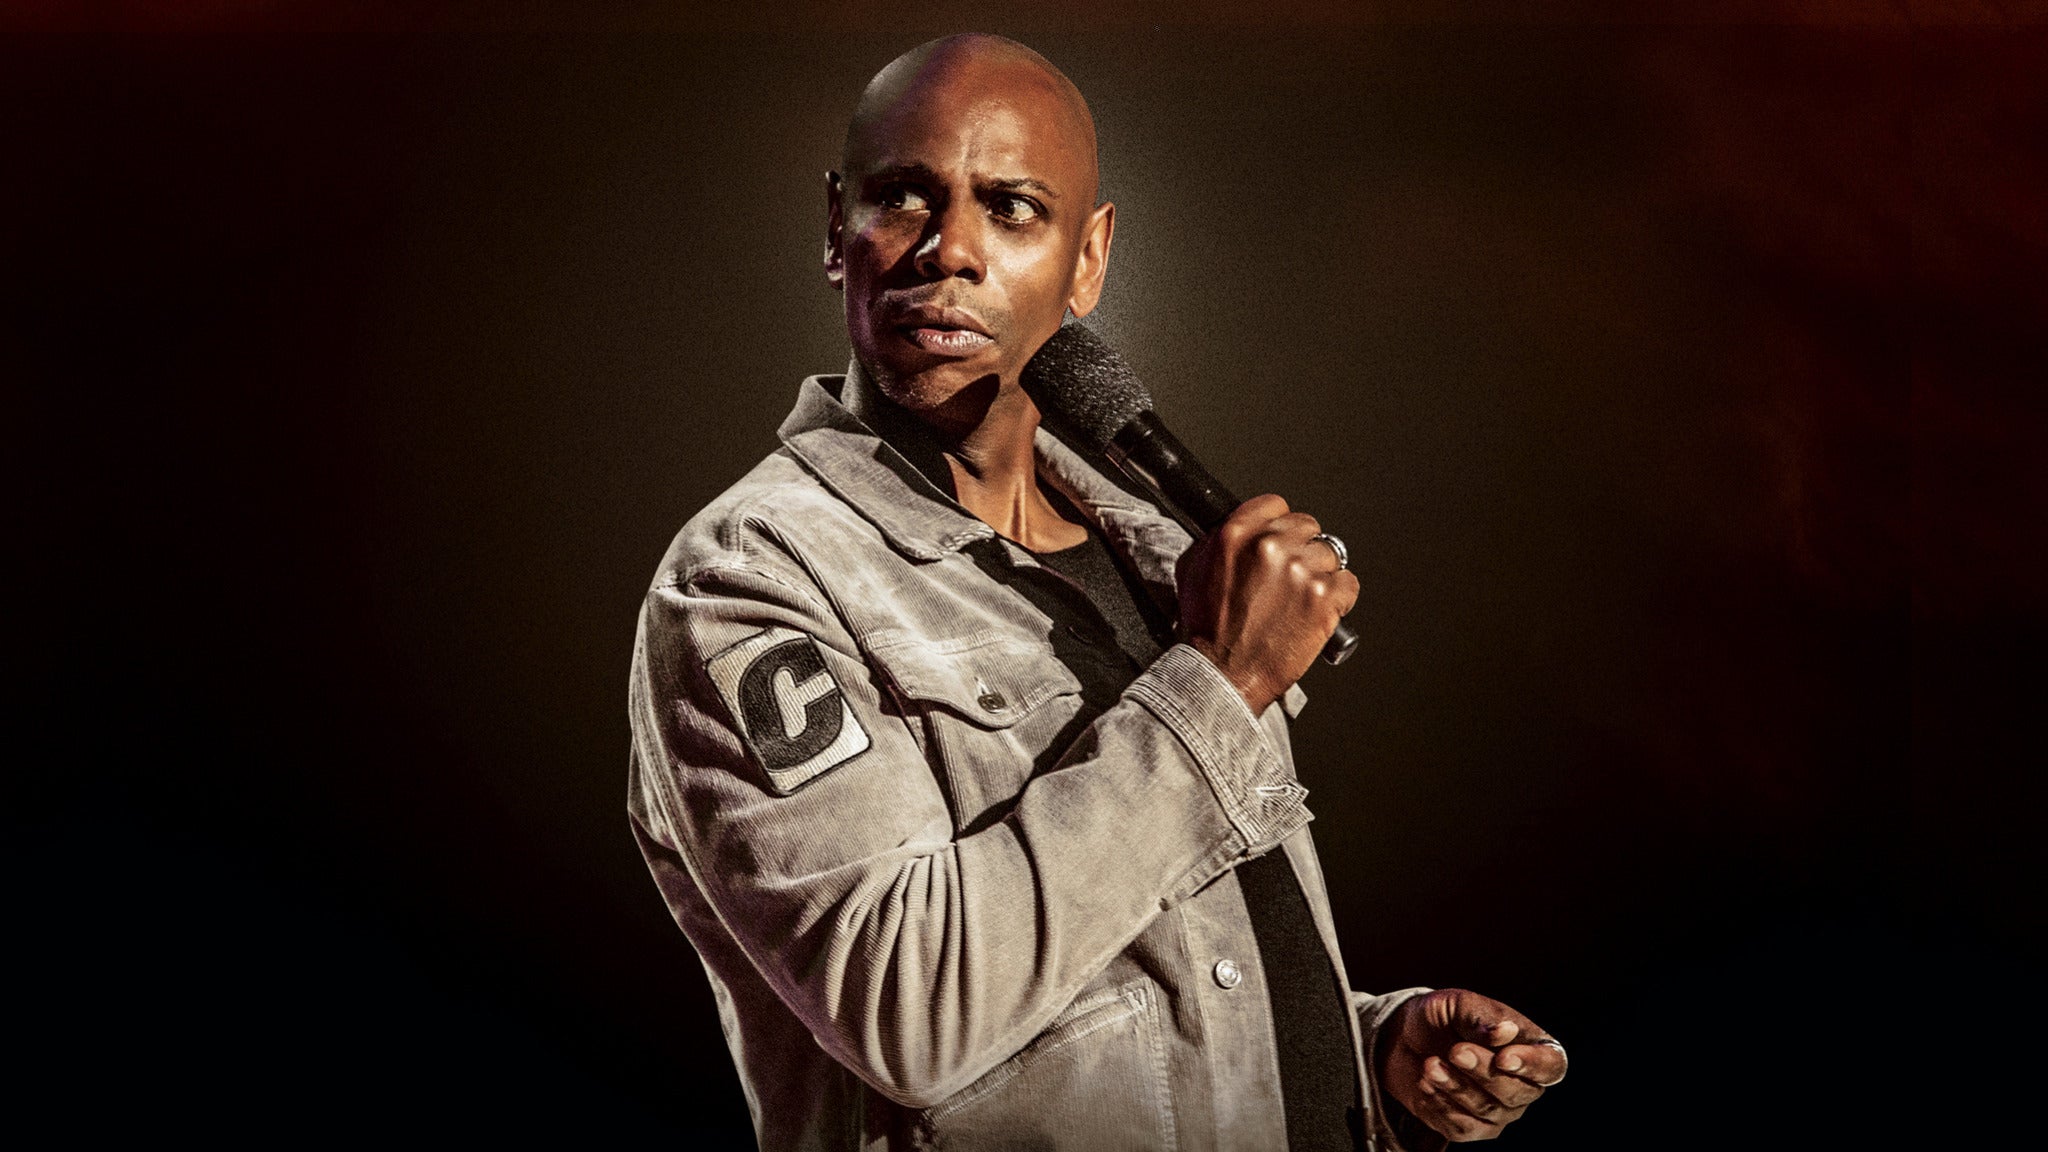 Dave Chappelle and Friends presale password for early tickets in Vancouver